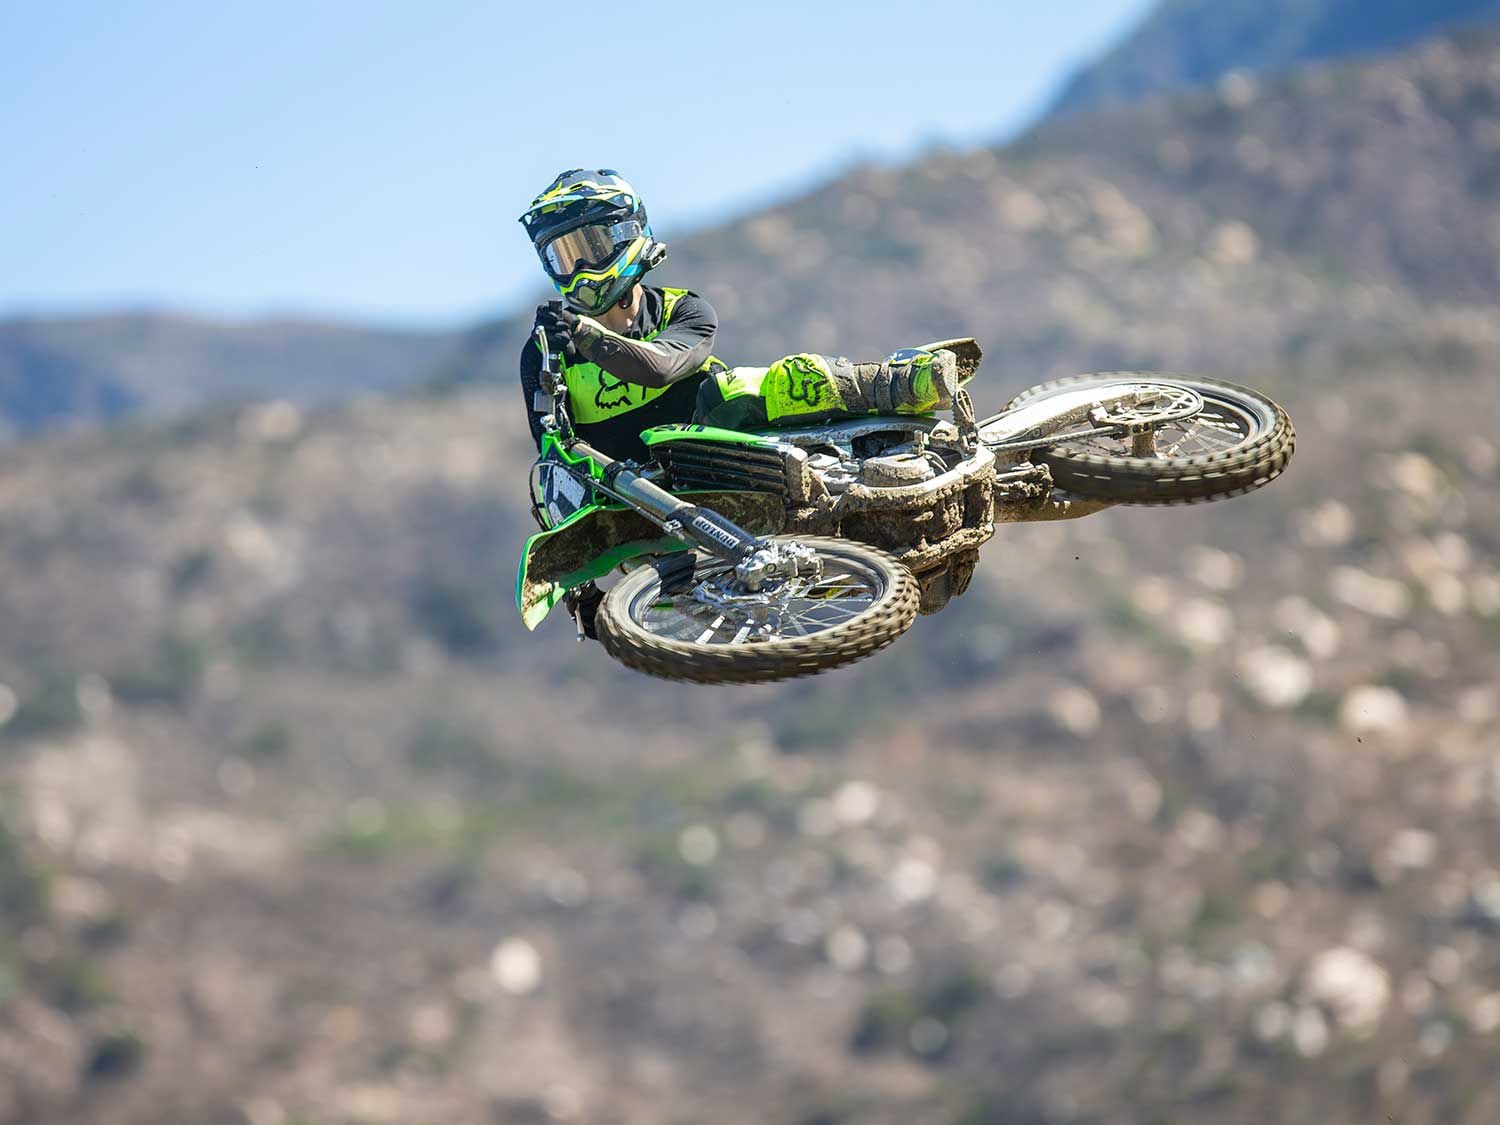 “Overall, the Kawasaki KX250 offers a great package with its linear power delivery, simple suspension setup, and being one of the most agile and nimble bikes in the class. Although, its EFI mapping changes should be able to be done on the fly, which is not the case with the couplers.” <em>—Michael Wicker</em>